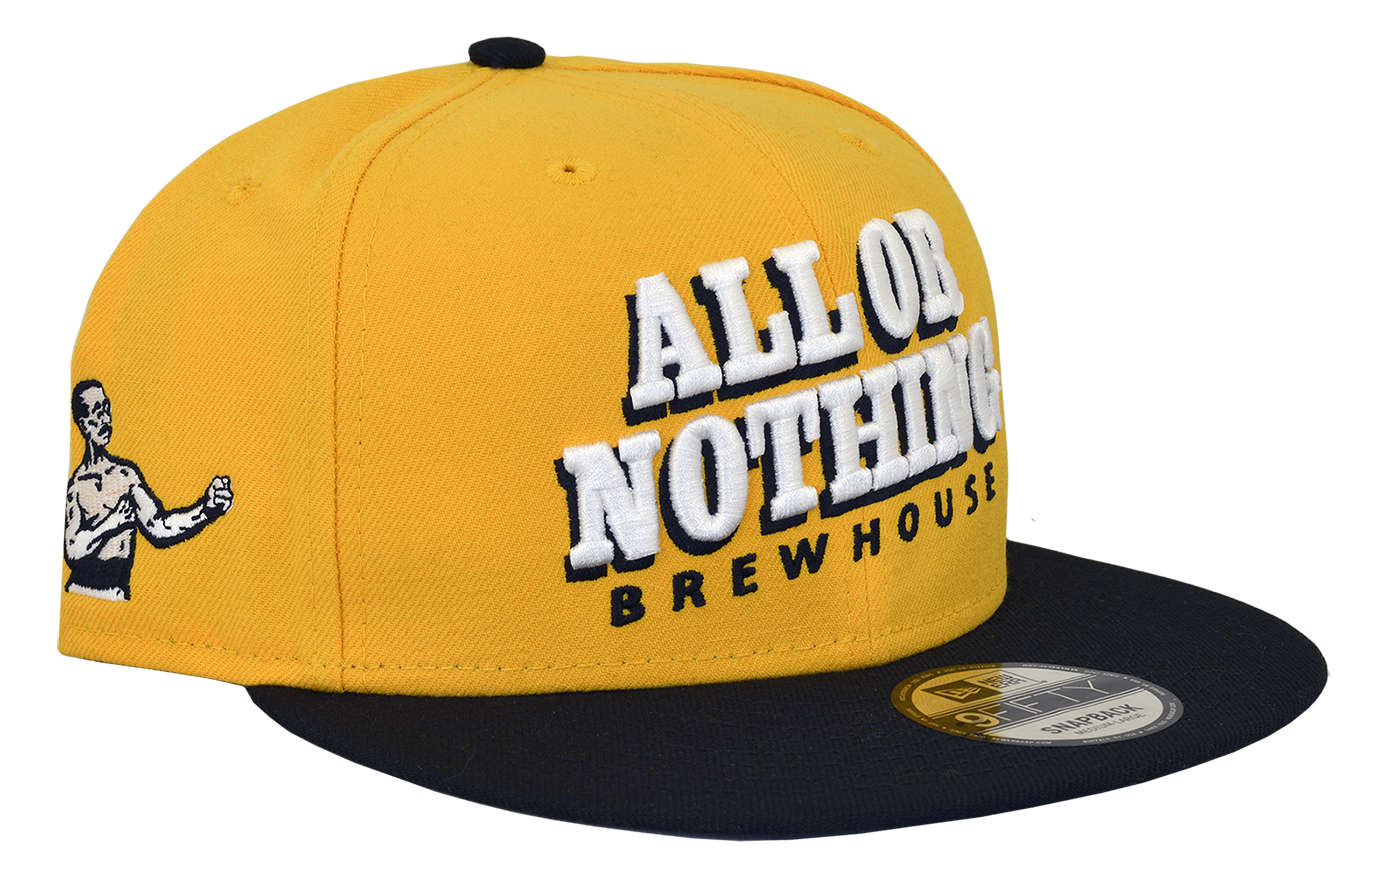 New-Era All or Nothing Snap-Back Hat - All or Nothing Brewhouse